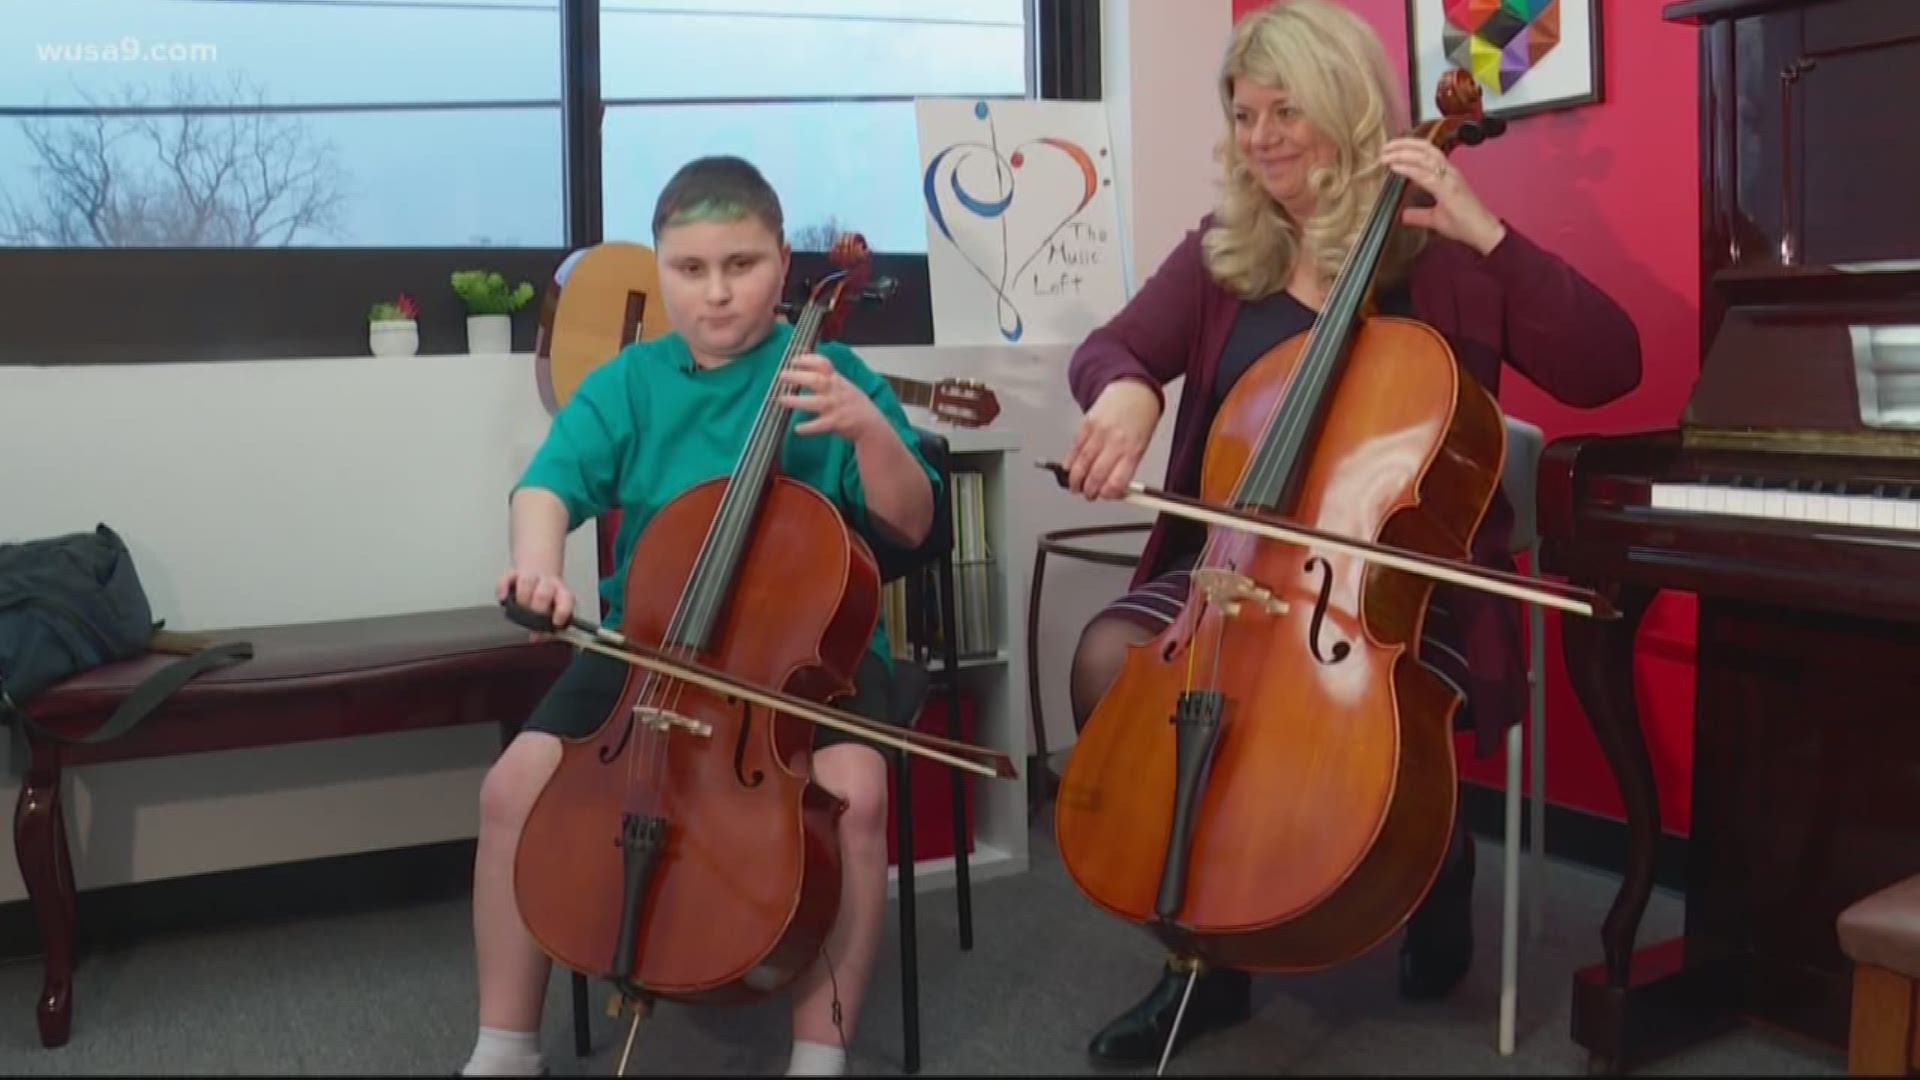 A Northern Virginia girl recently went out of her way to help a teenager with a disability play the instrument he loves.